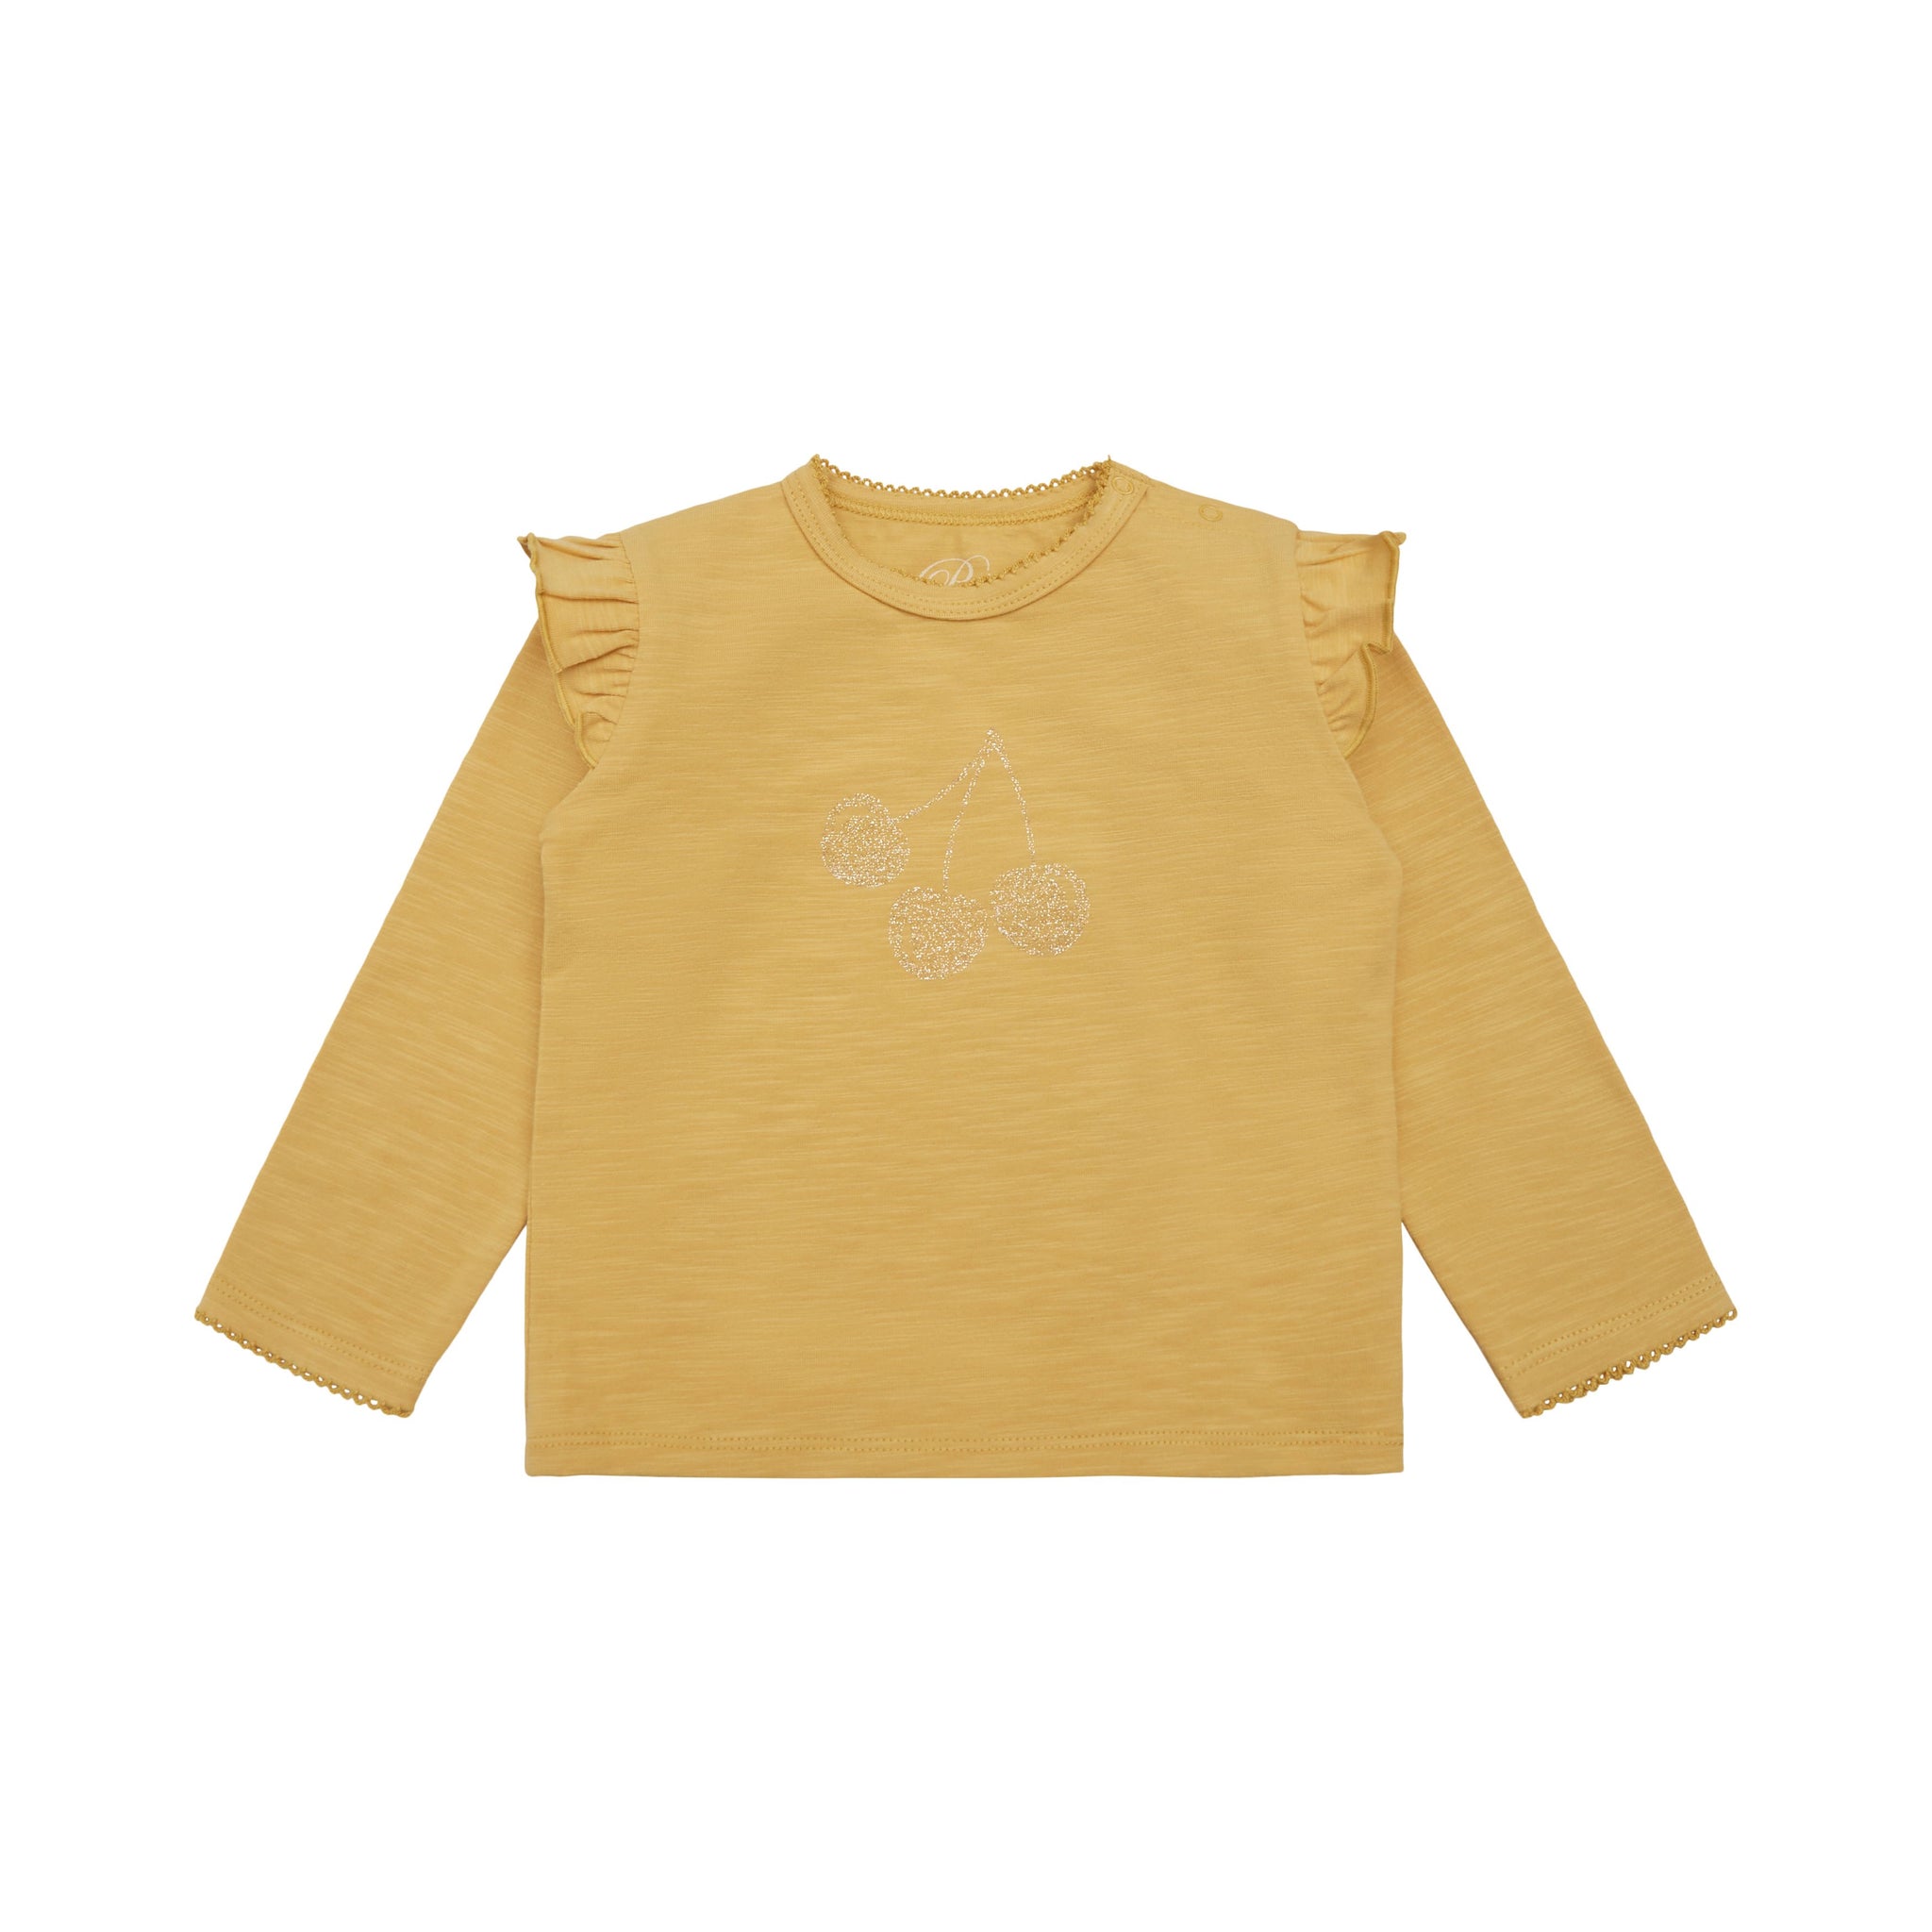 Petit by Sofie Schnoor - Bluse LS, Elenor - Yellow / Champagne